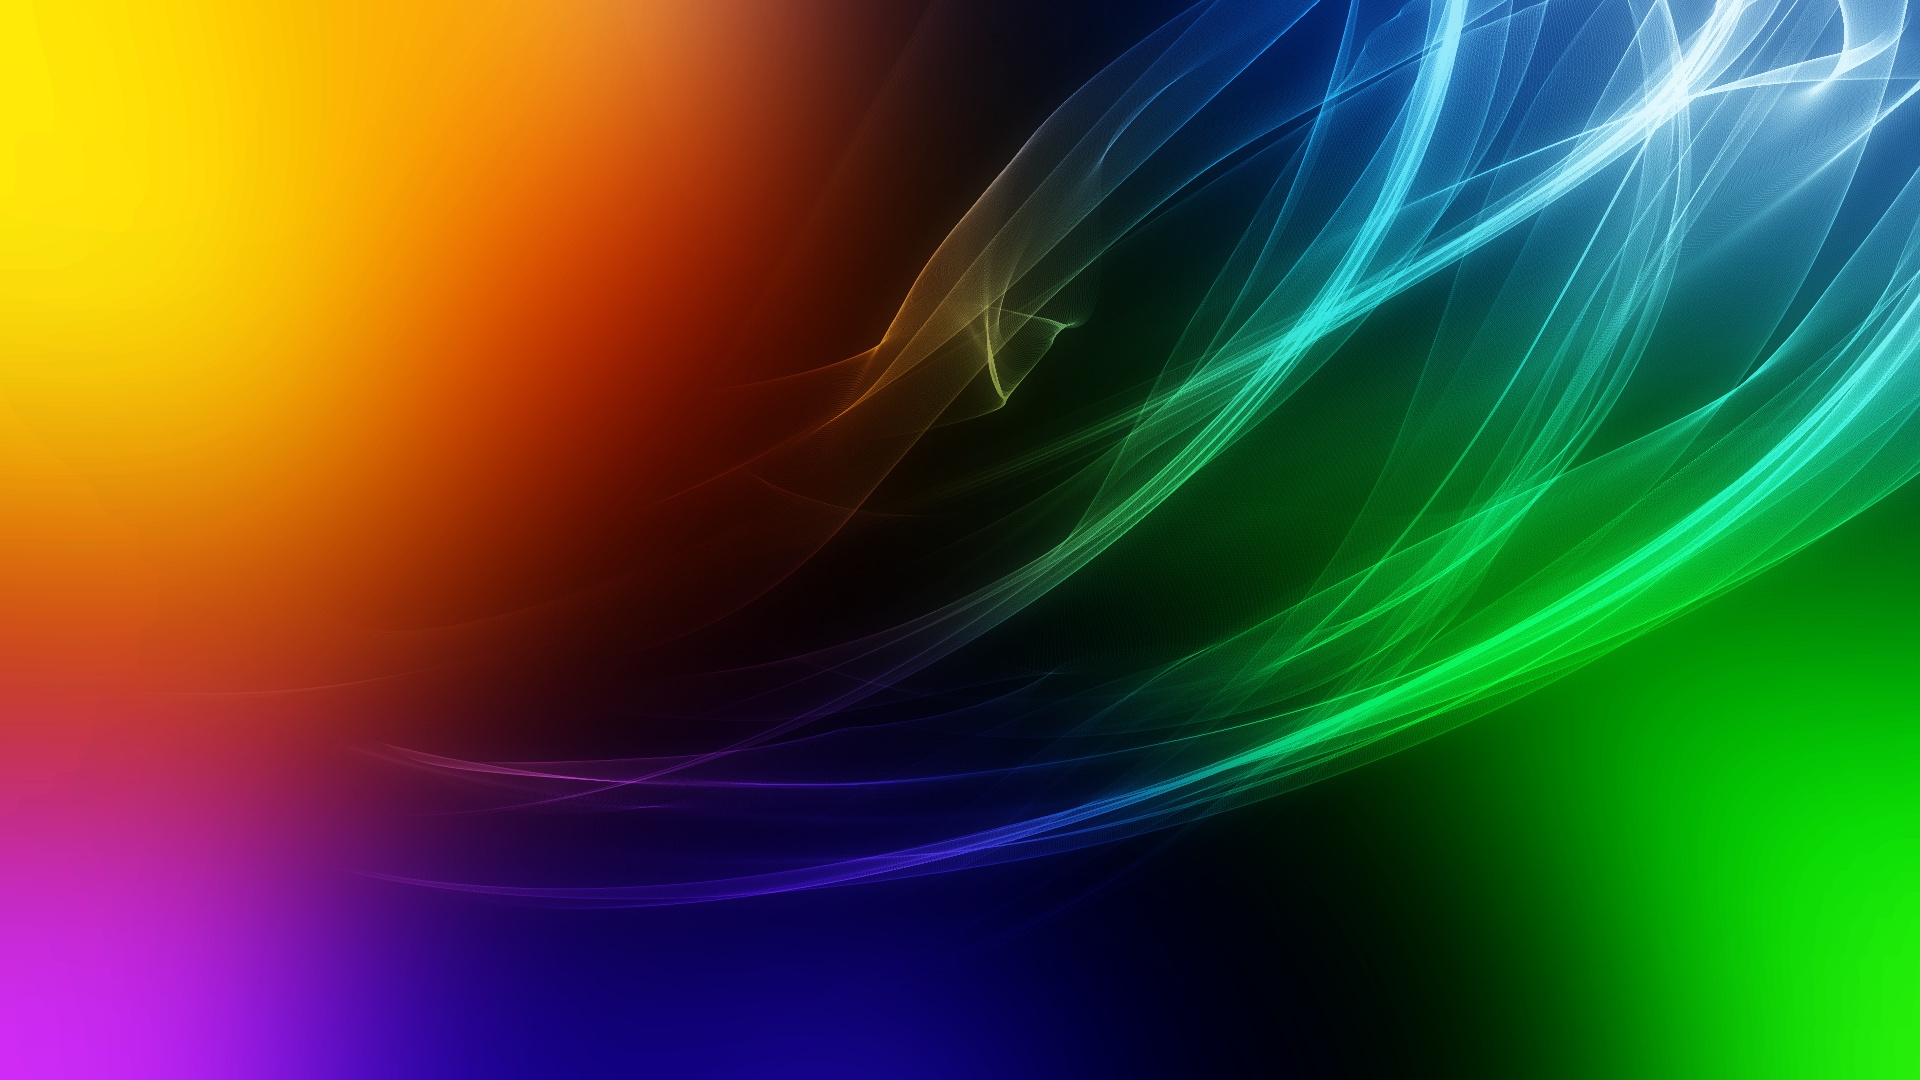 colour wallpaper download,blue,green,light,yellow,colorfulness